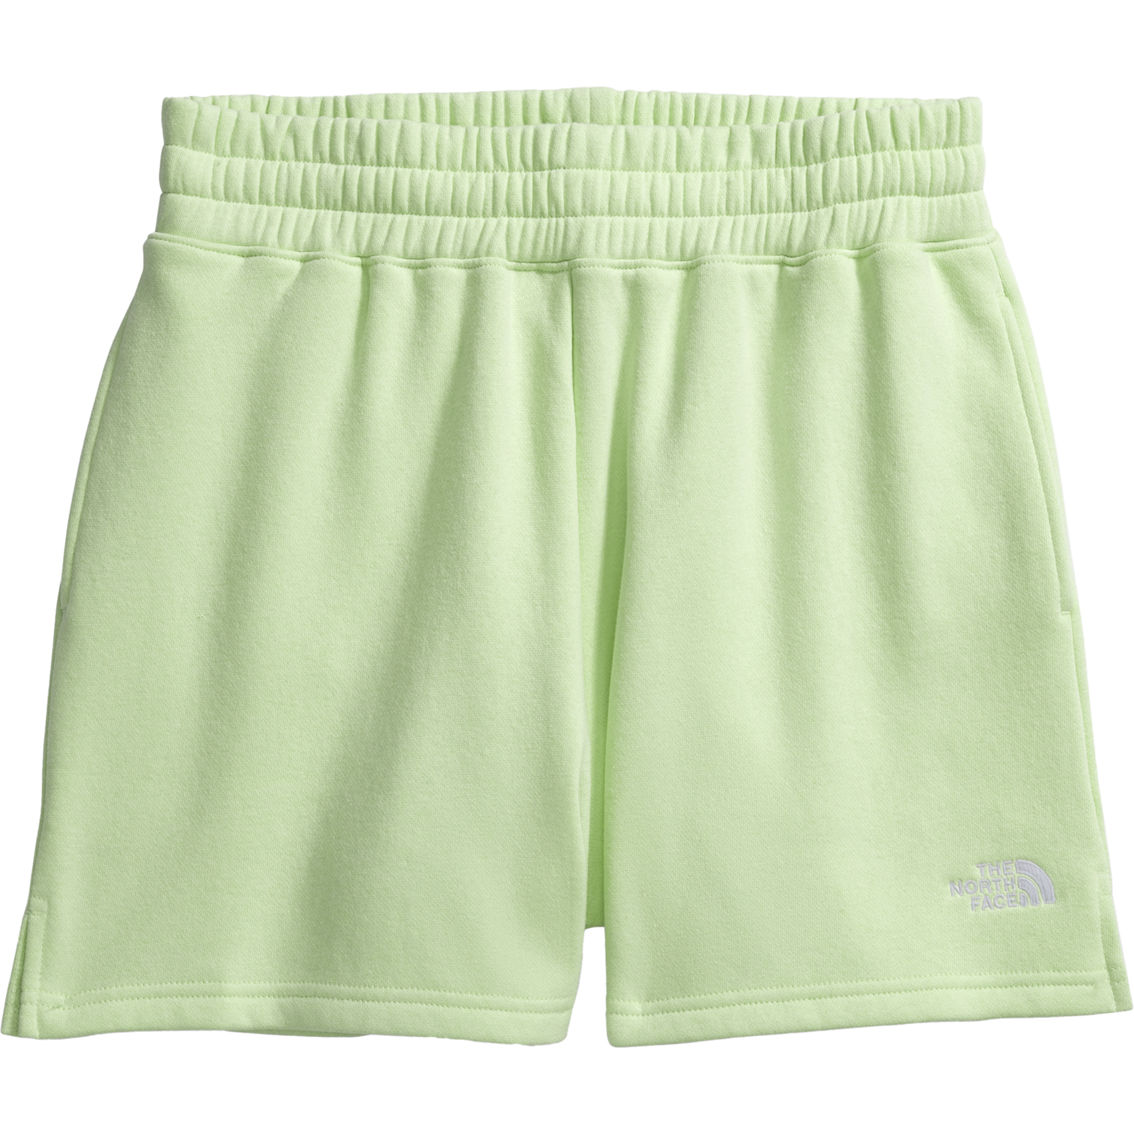 The North Face Evolution Shorts - Image 5 of 5